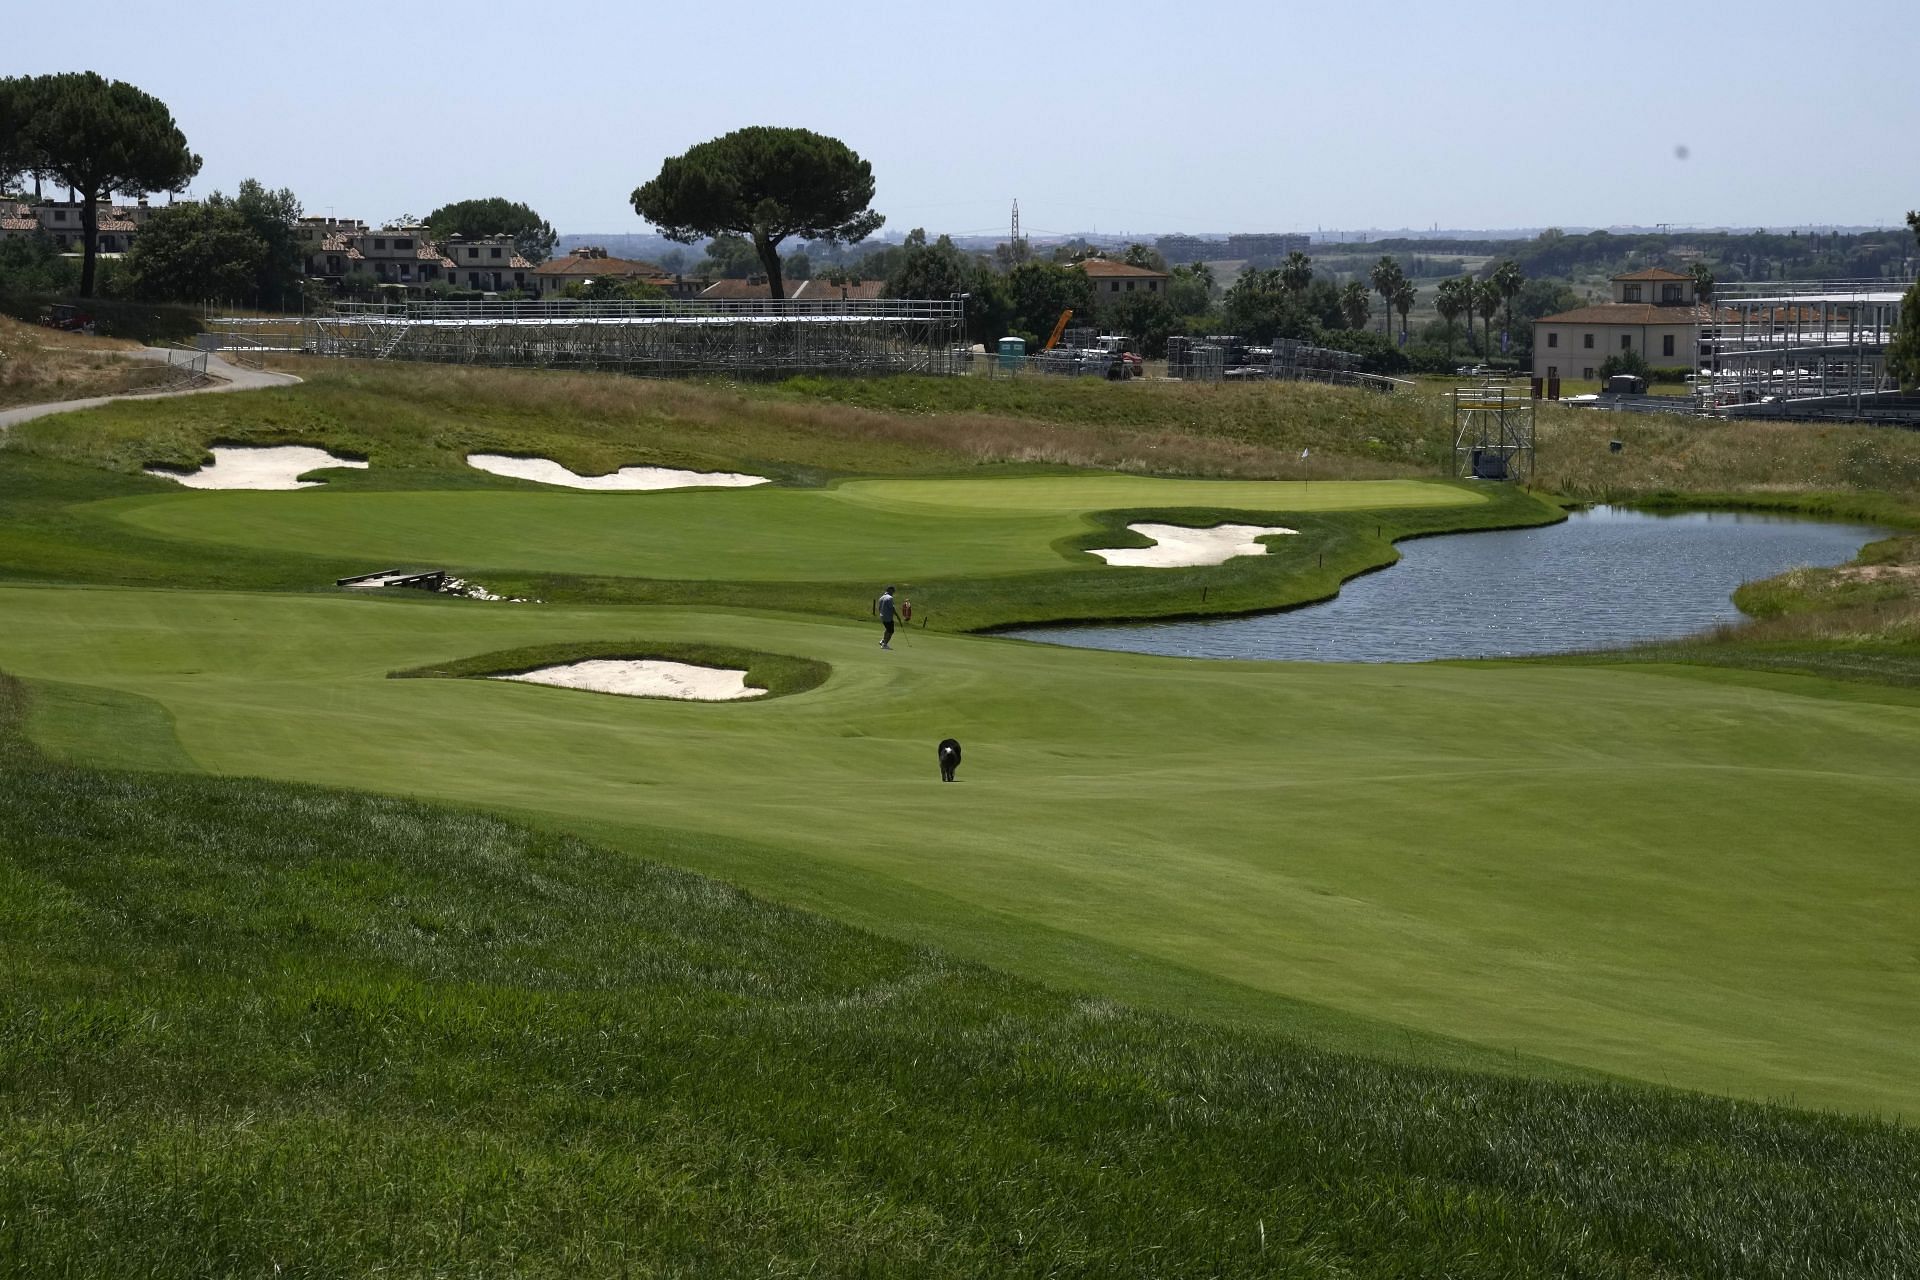 Exploring the Ryder Cup venue Marco Simone Golf & Country Club with an